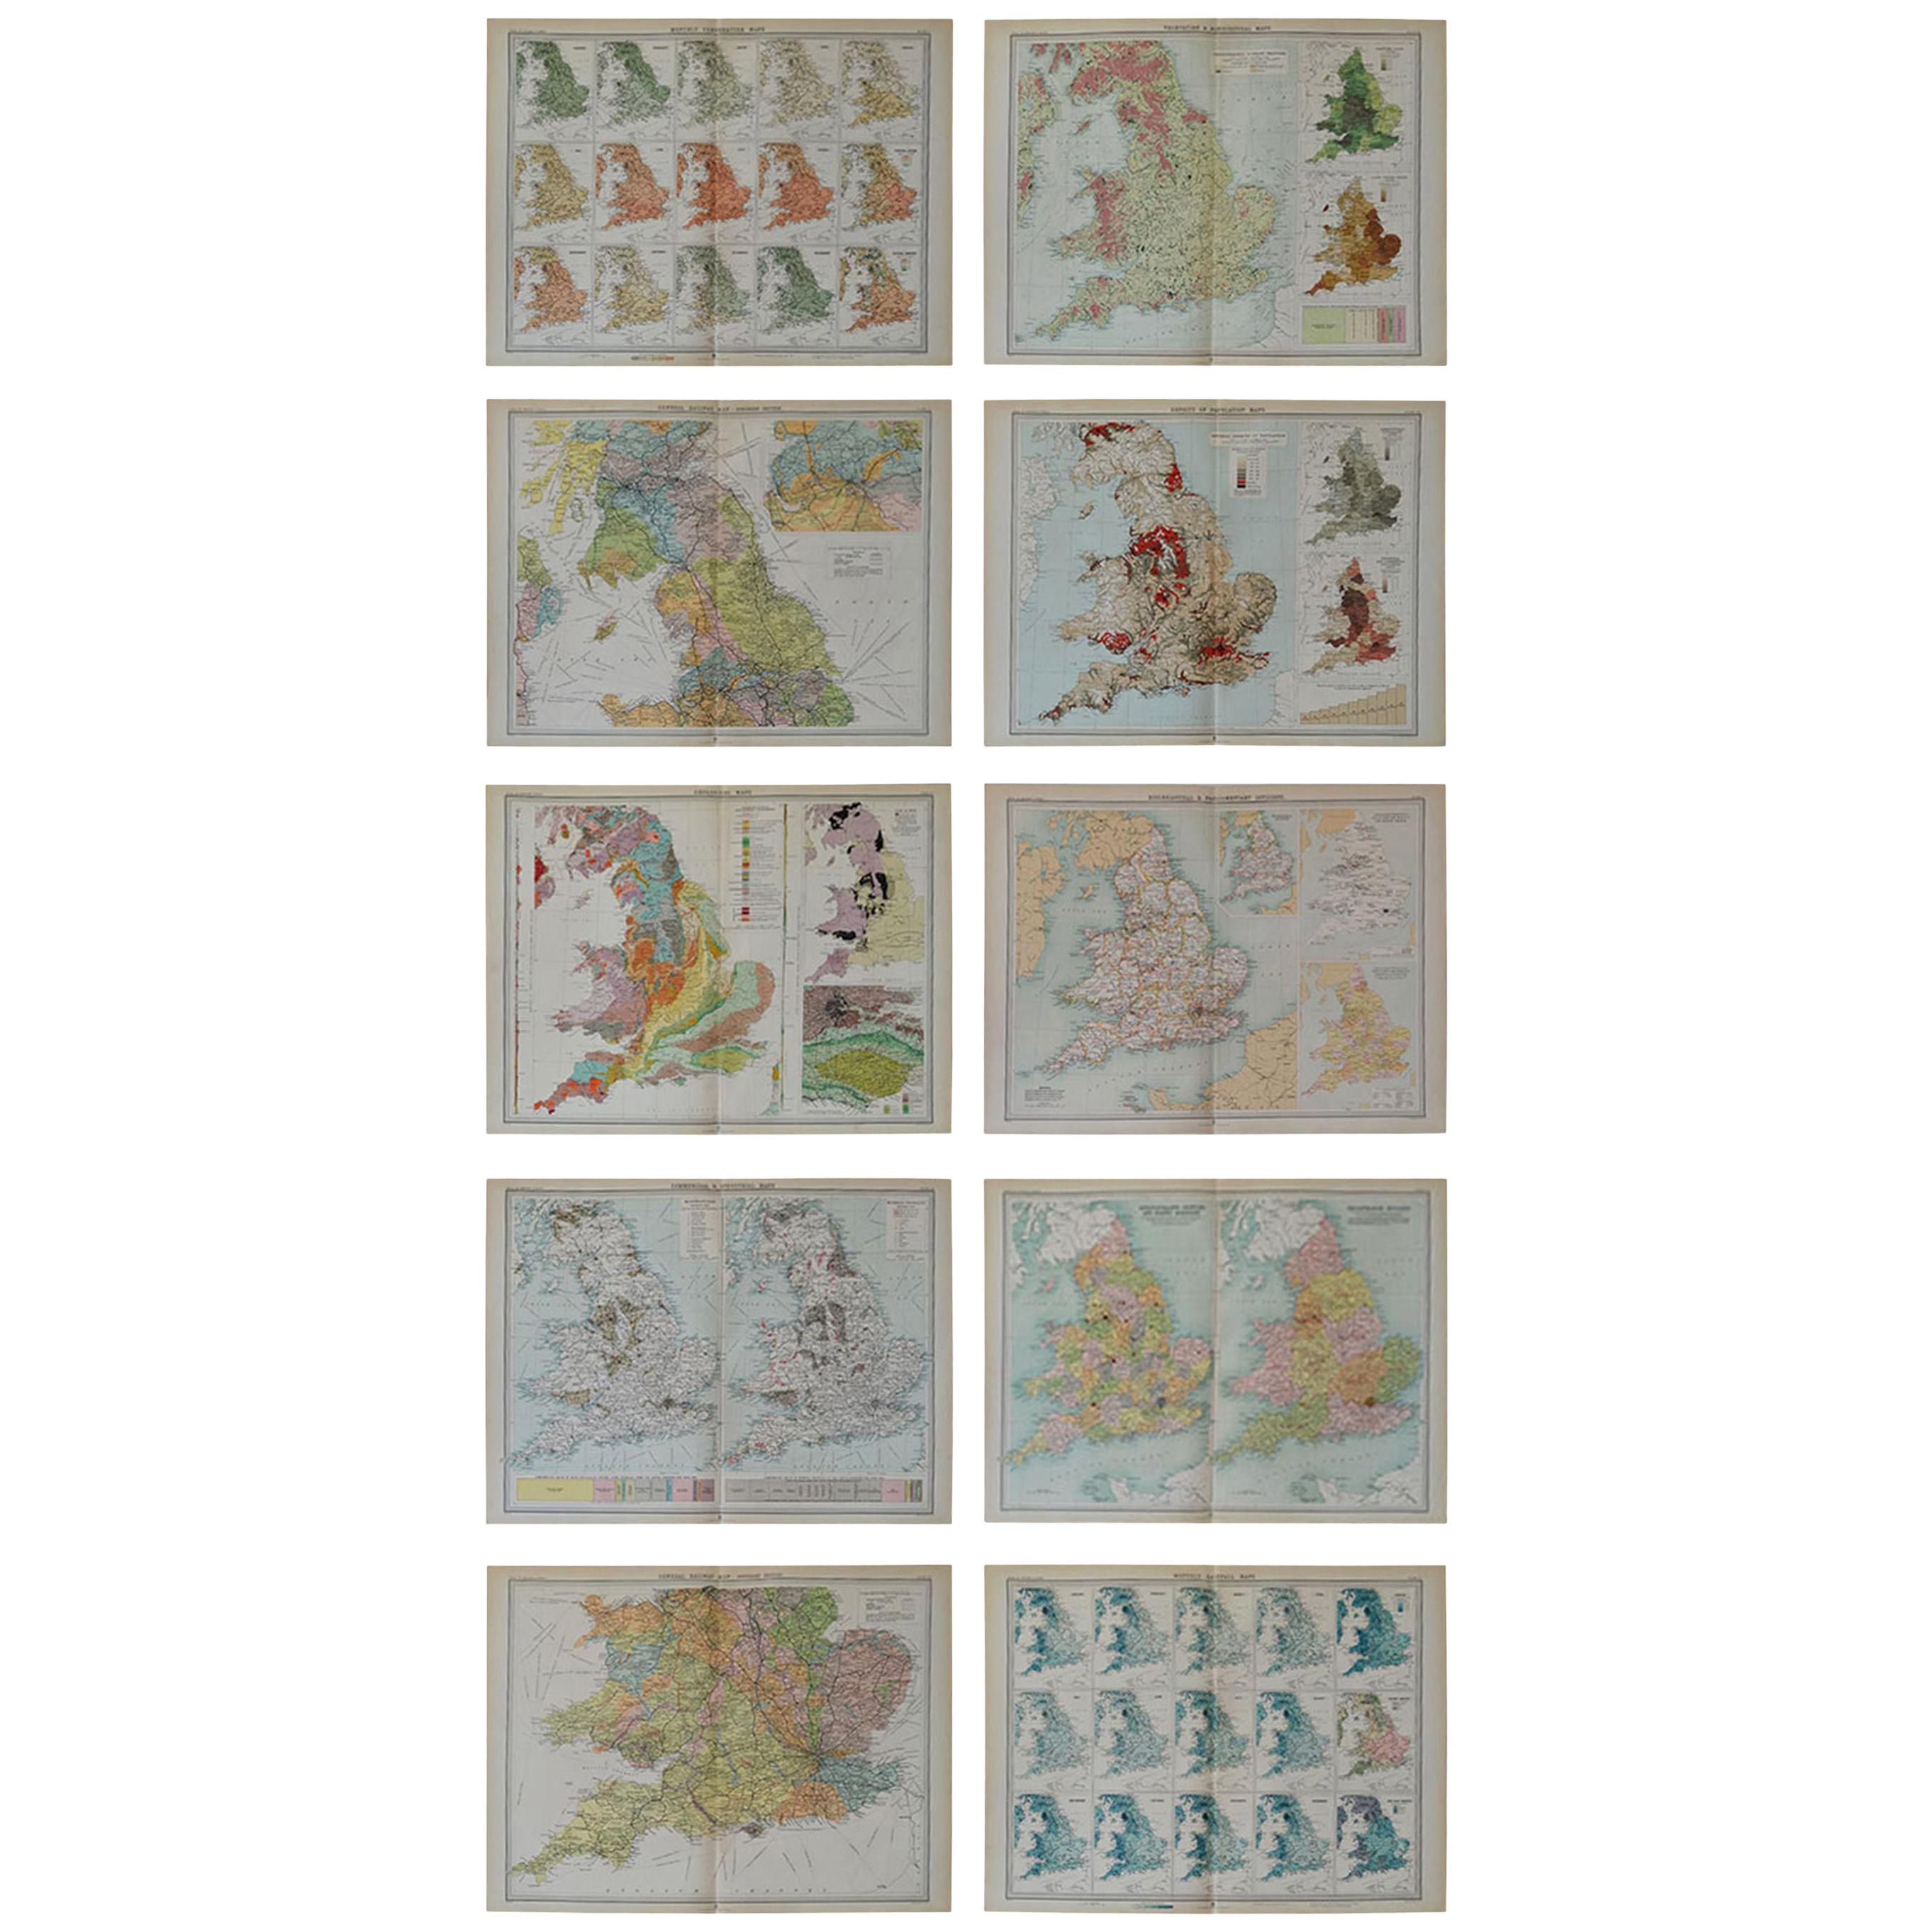 Set of 10 Large Scale Vintage Maps of the United Kingdom, circa 1900